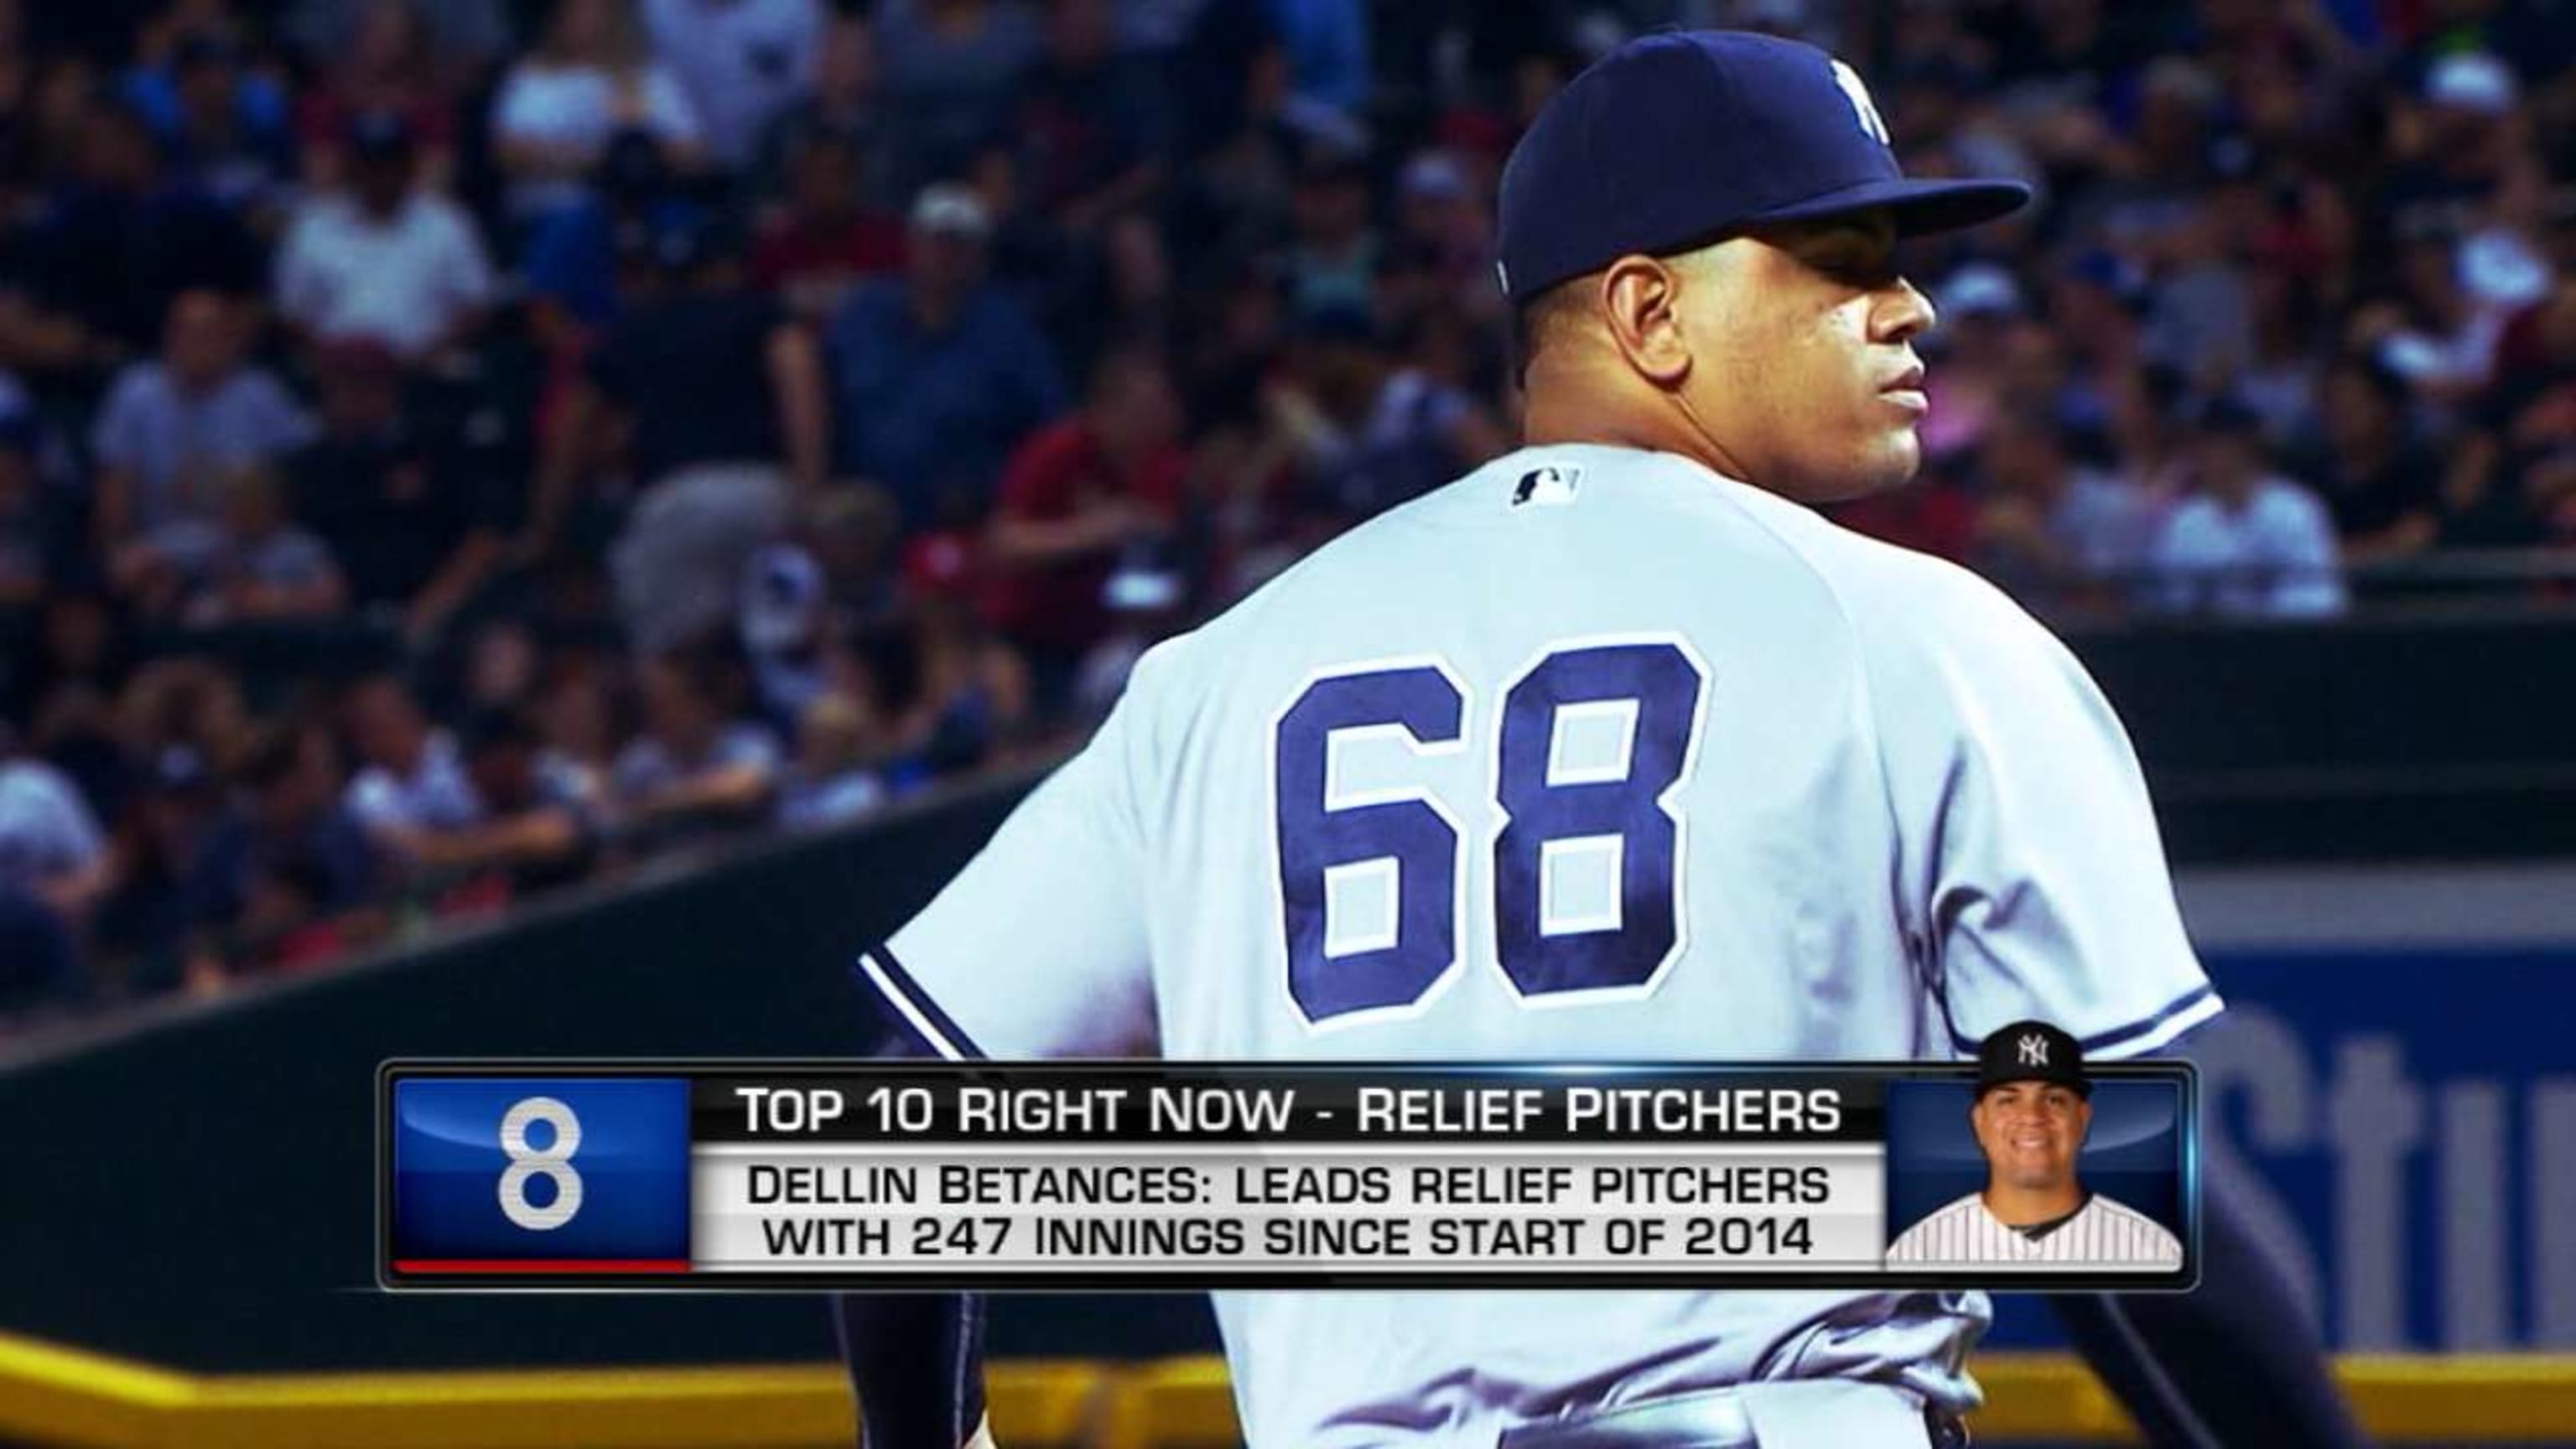 New York Yankees: Dellin Betances to Pitch for Dominican Republic